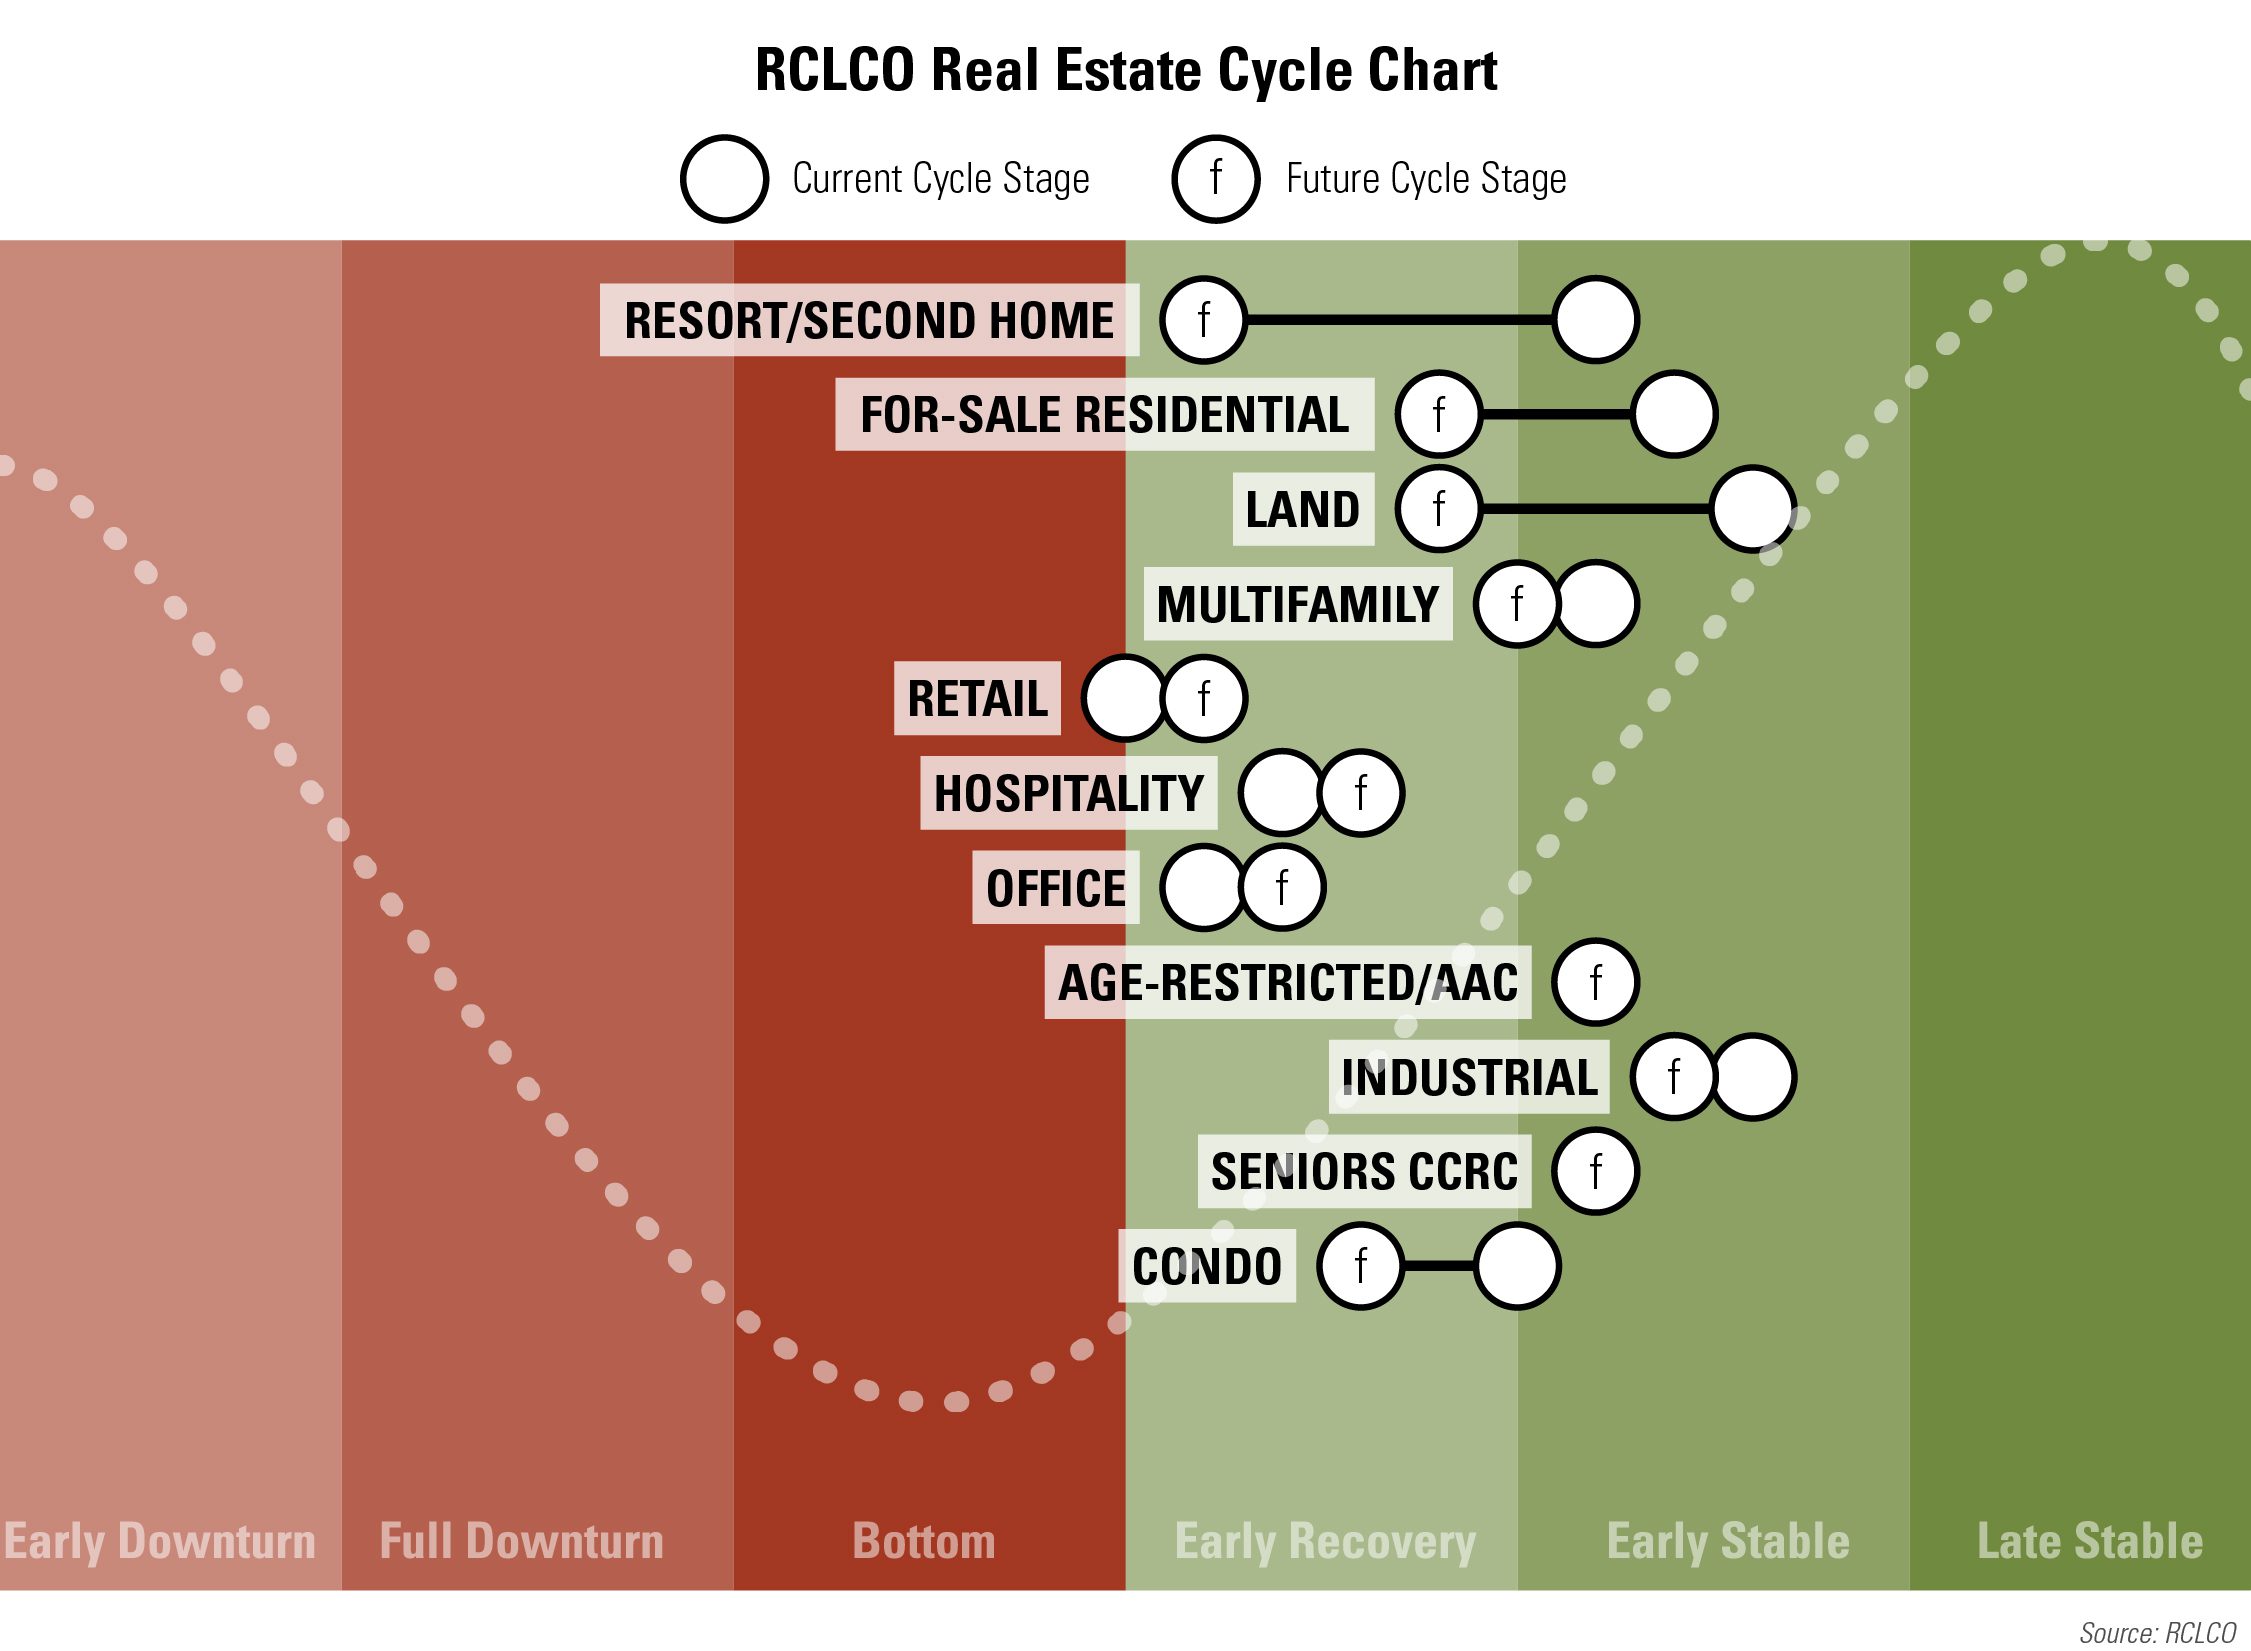  RCLCO Real Estate Cycle Chart